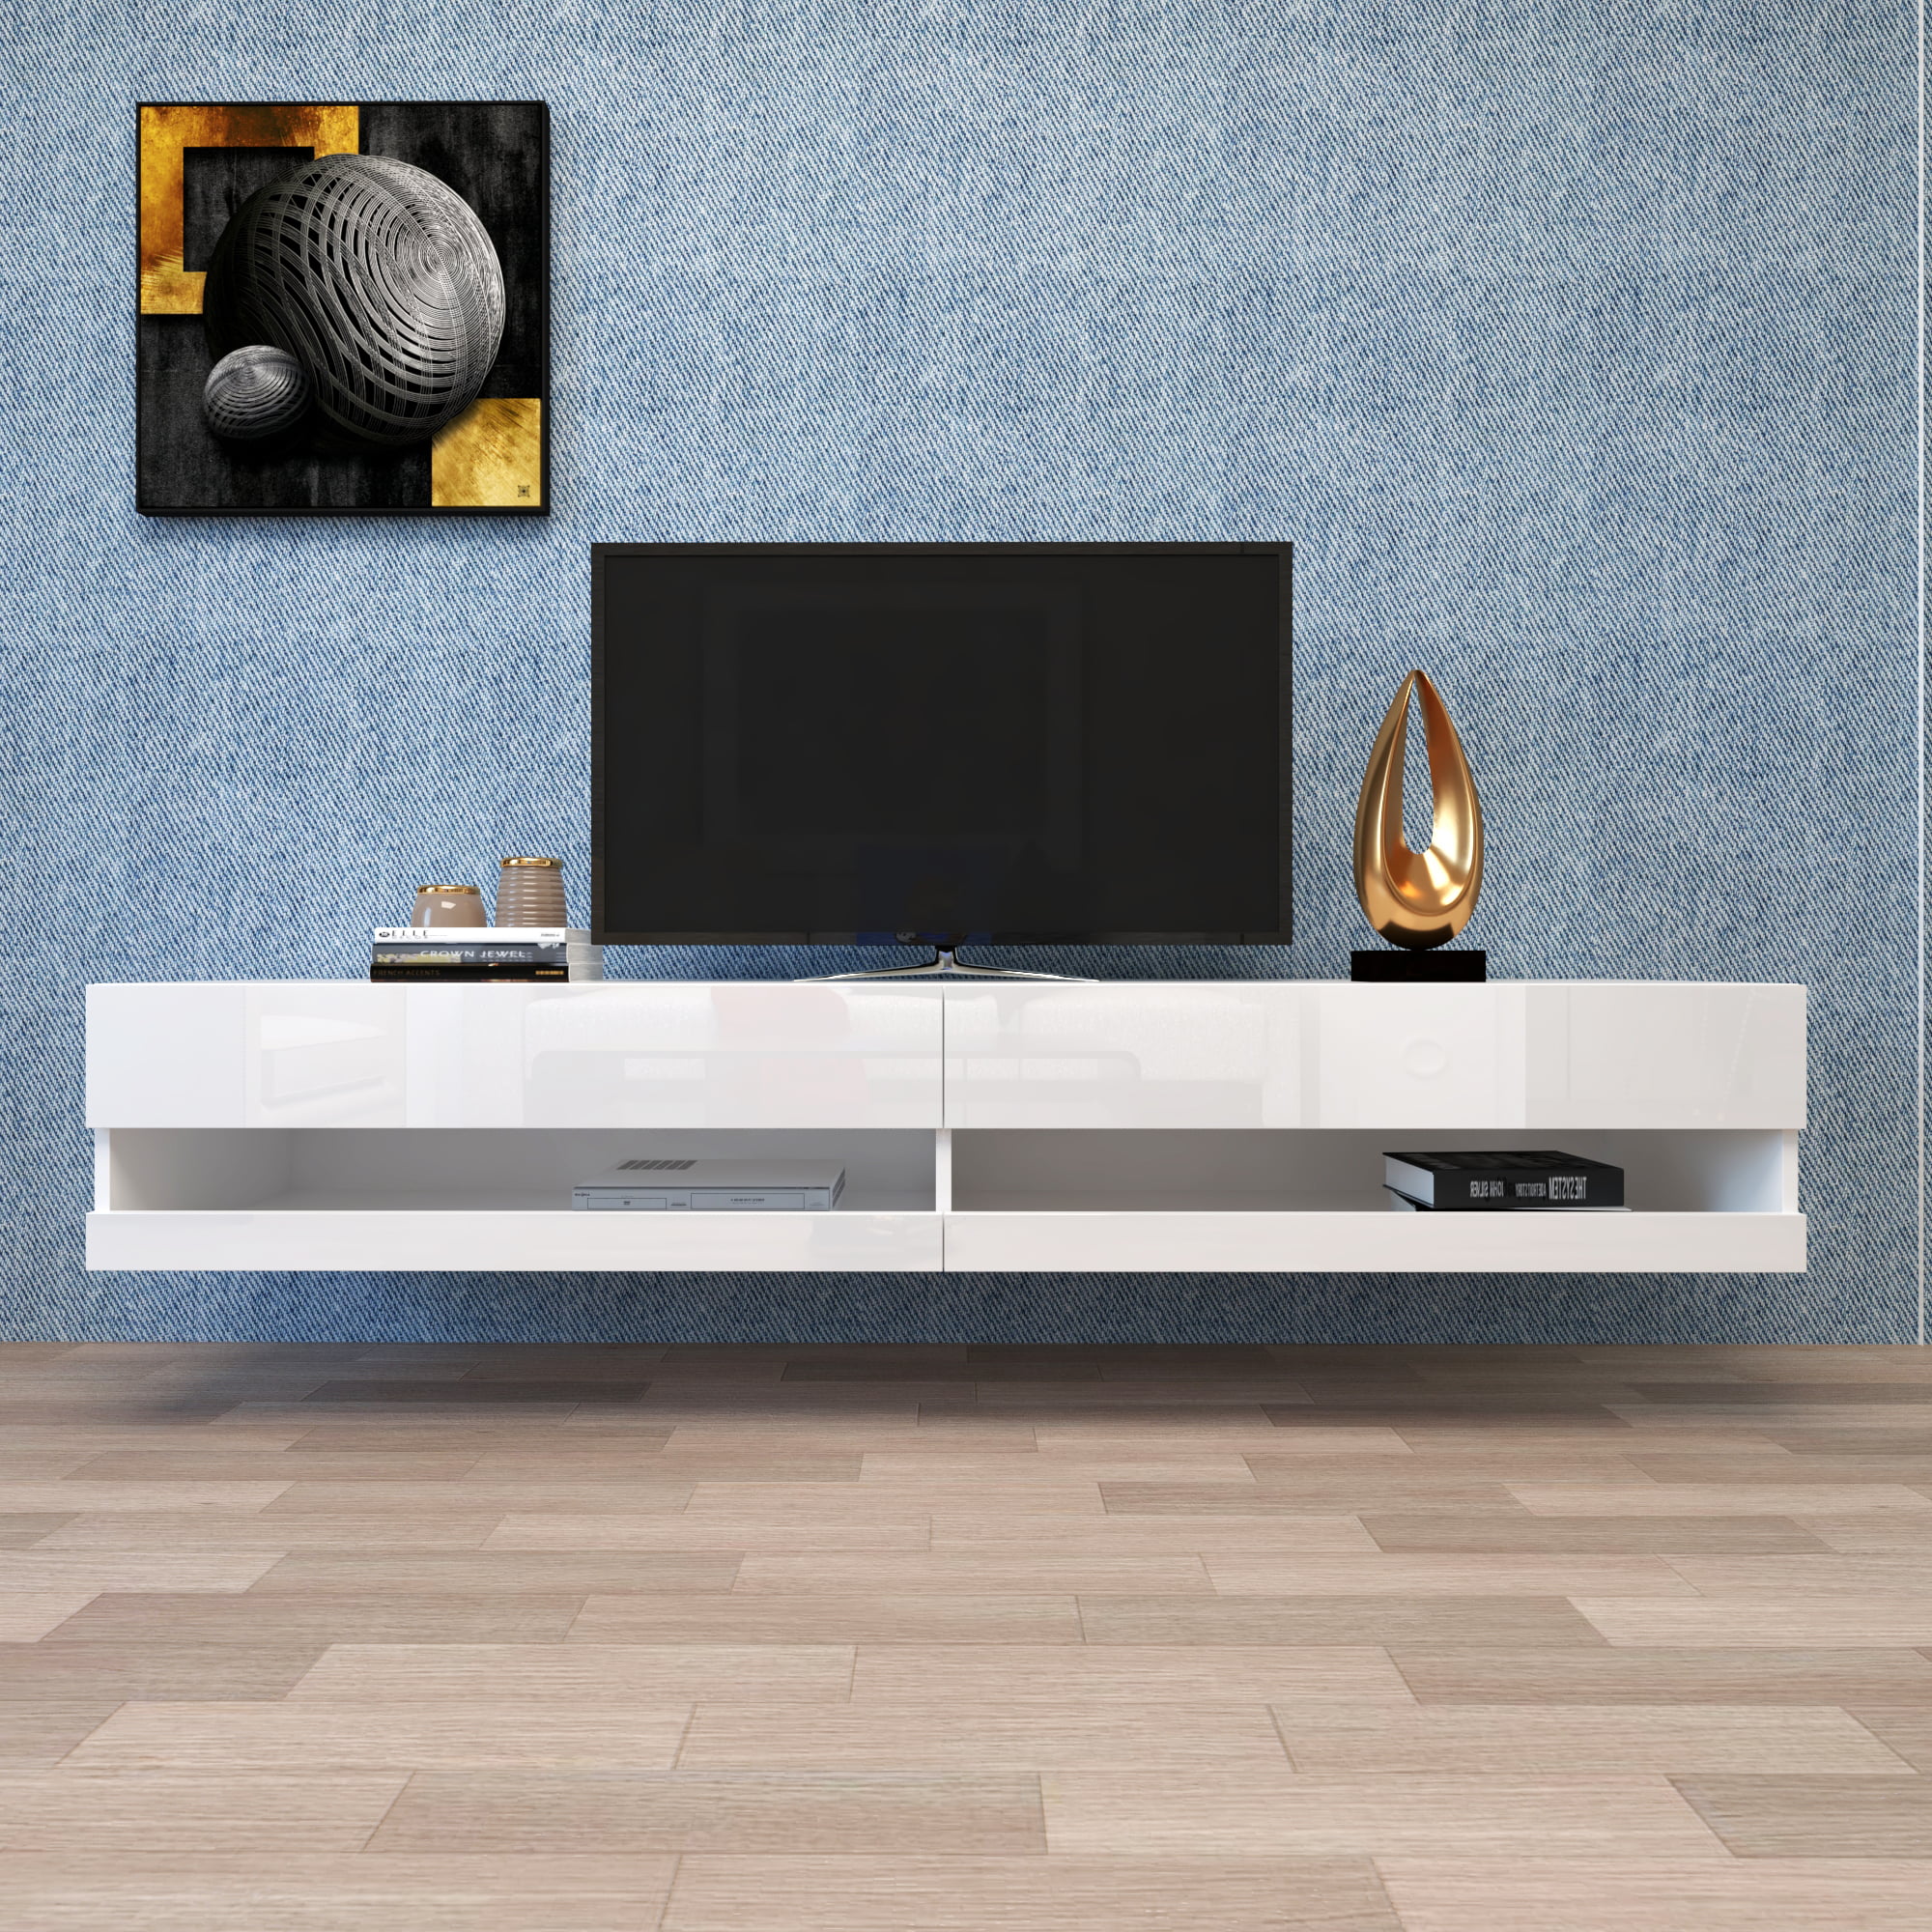 White Wall Mounted TV Stand, SEGMART LED TV for 80 Inch TV Screens, Floating TV Stand